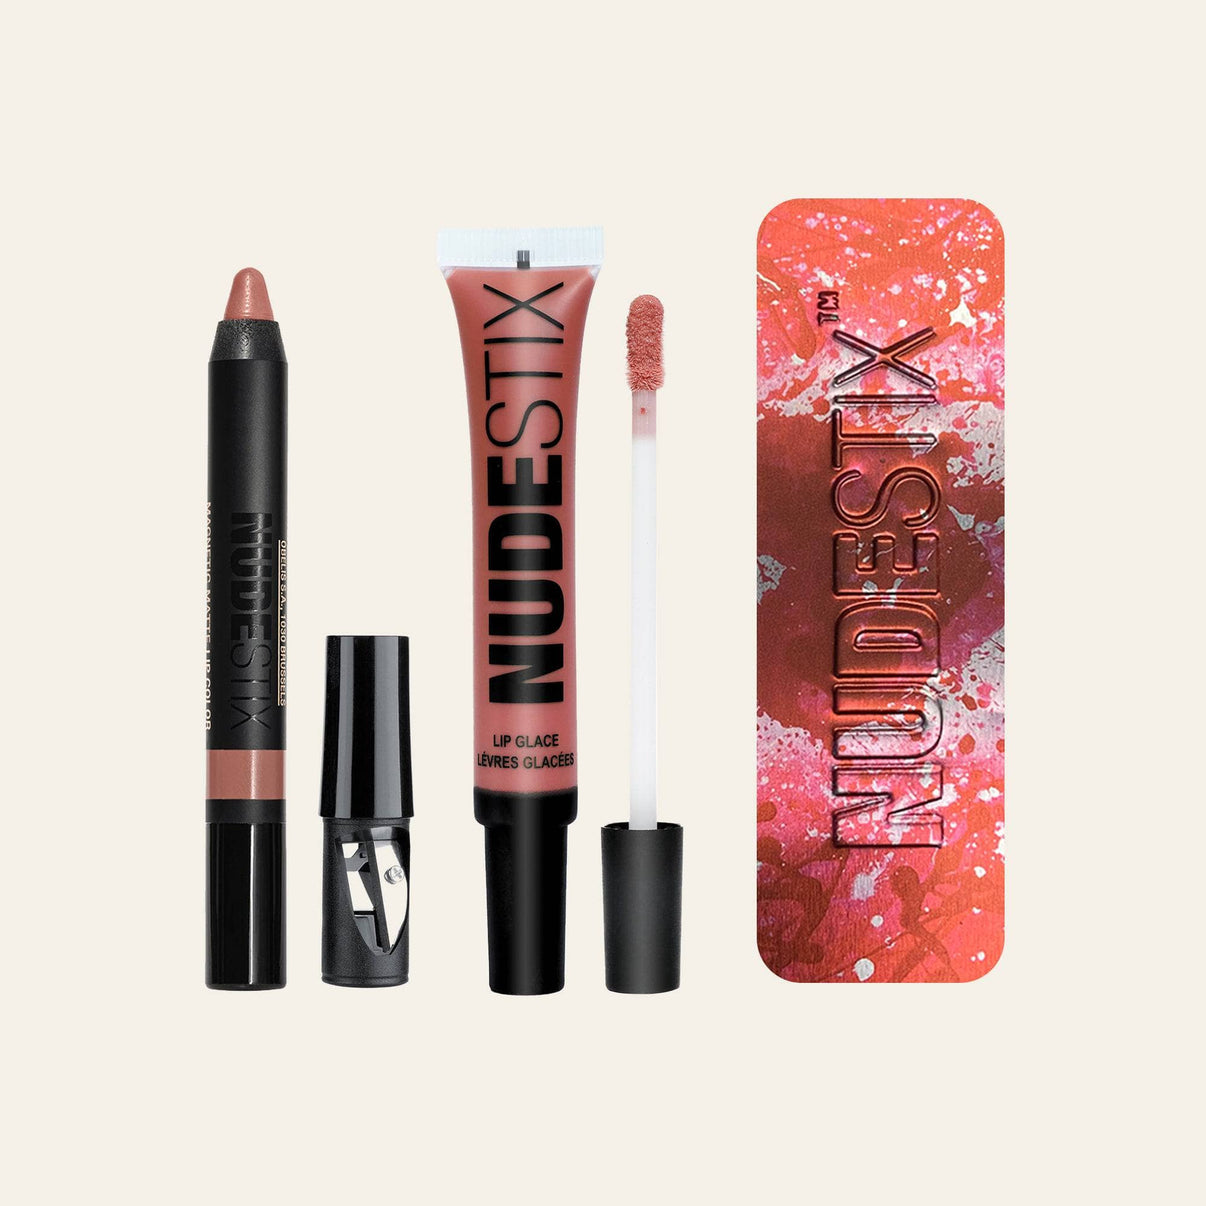 Protect, Perfect + Plump Lip Kit in NUDE with Nudestix can